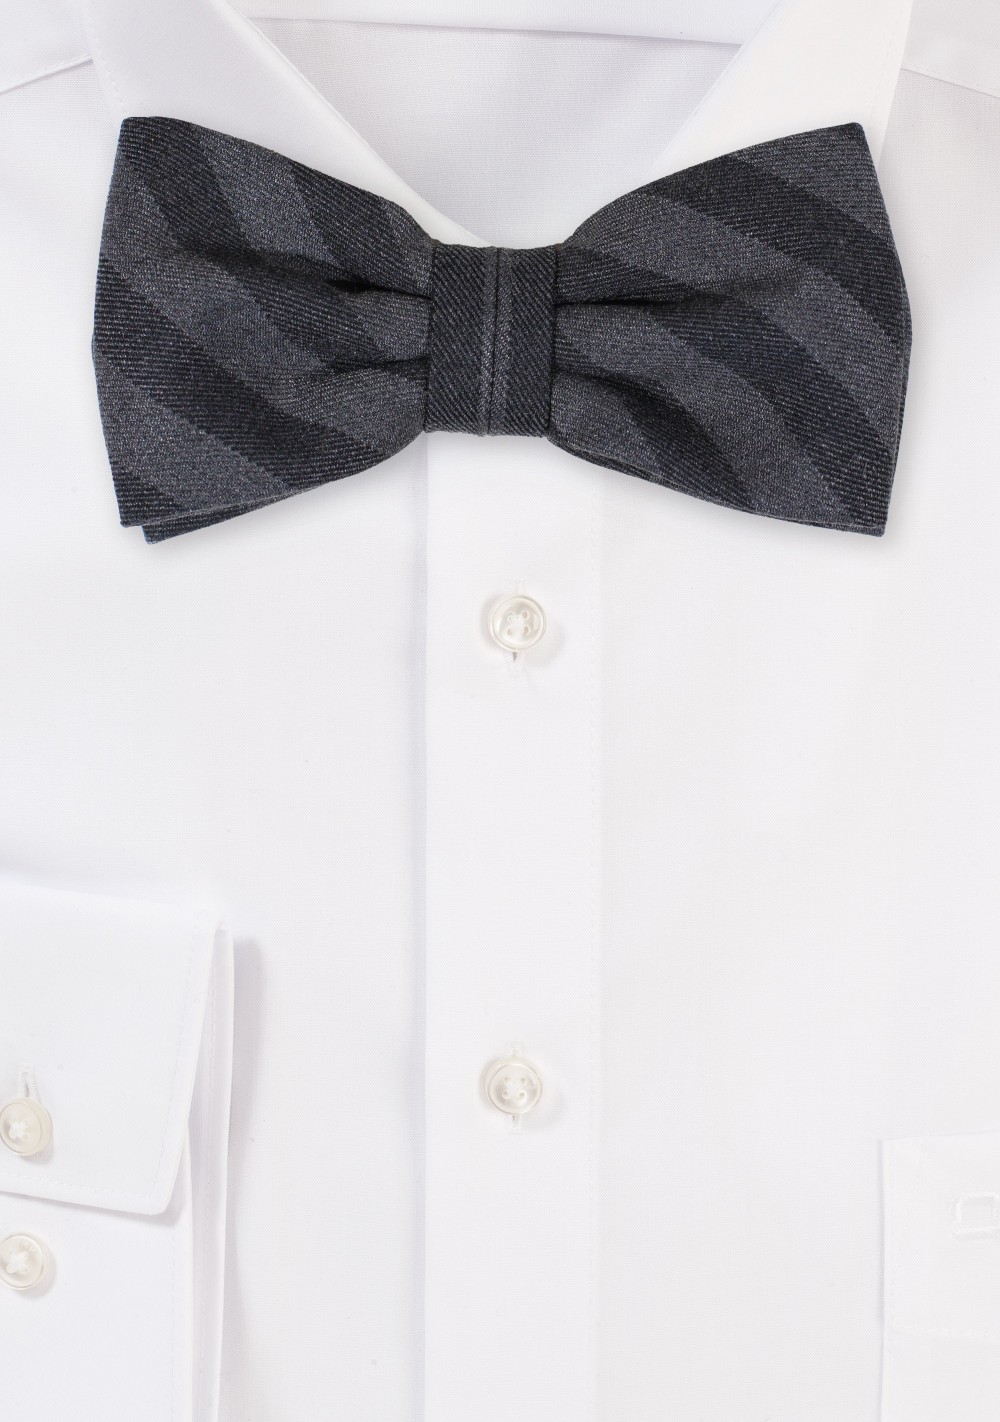 Charcoal Gray Striped Cotton Bowtie